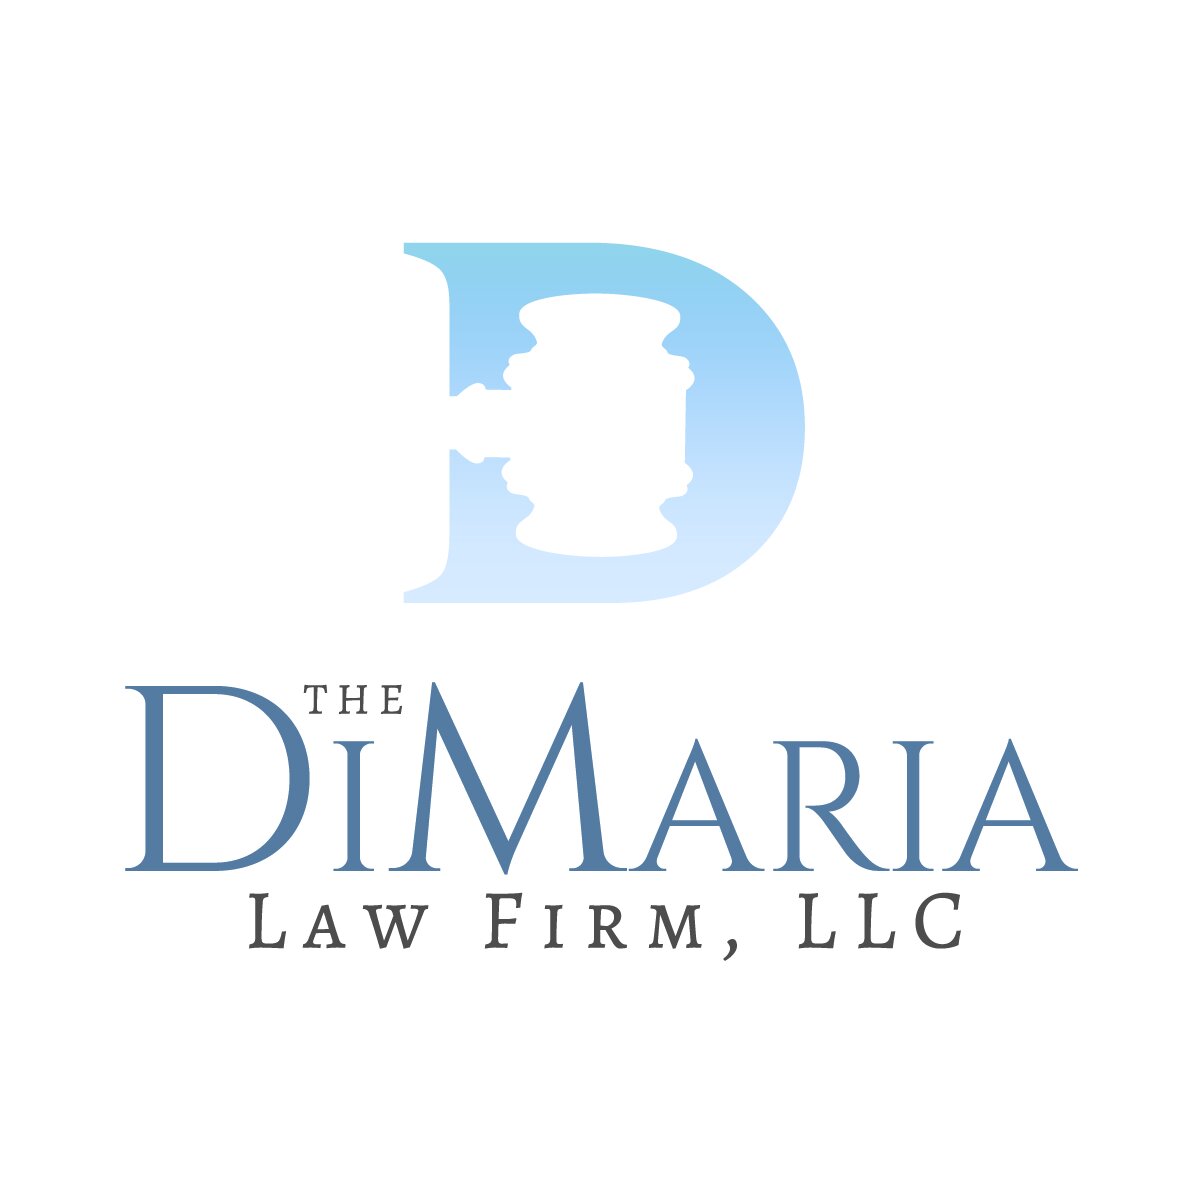 The DiMaria Law Firm